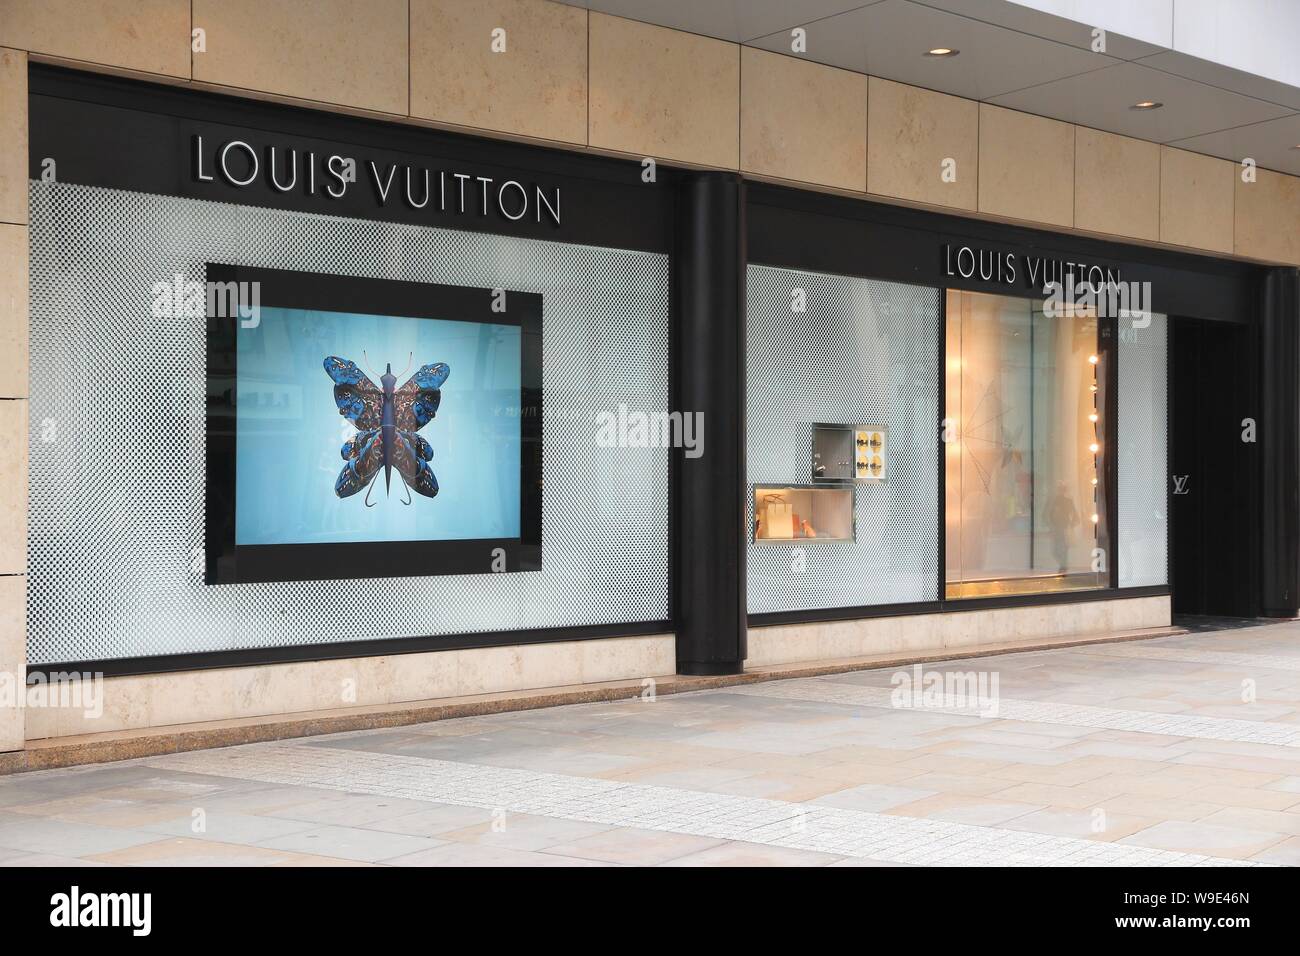 MANCHESTER, UK - APRIL 22, 2013: Louis Vuitton Luxury Fashion Store In  Manchester, UK. Forbes Says That LV Was The Most Powerful Luxury Brand In  The World In 2008 With $19.4bn USD